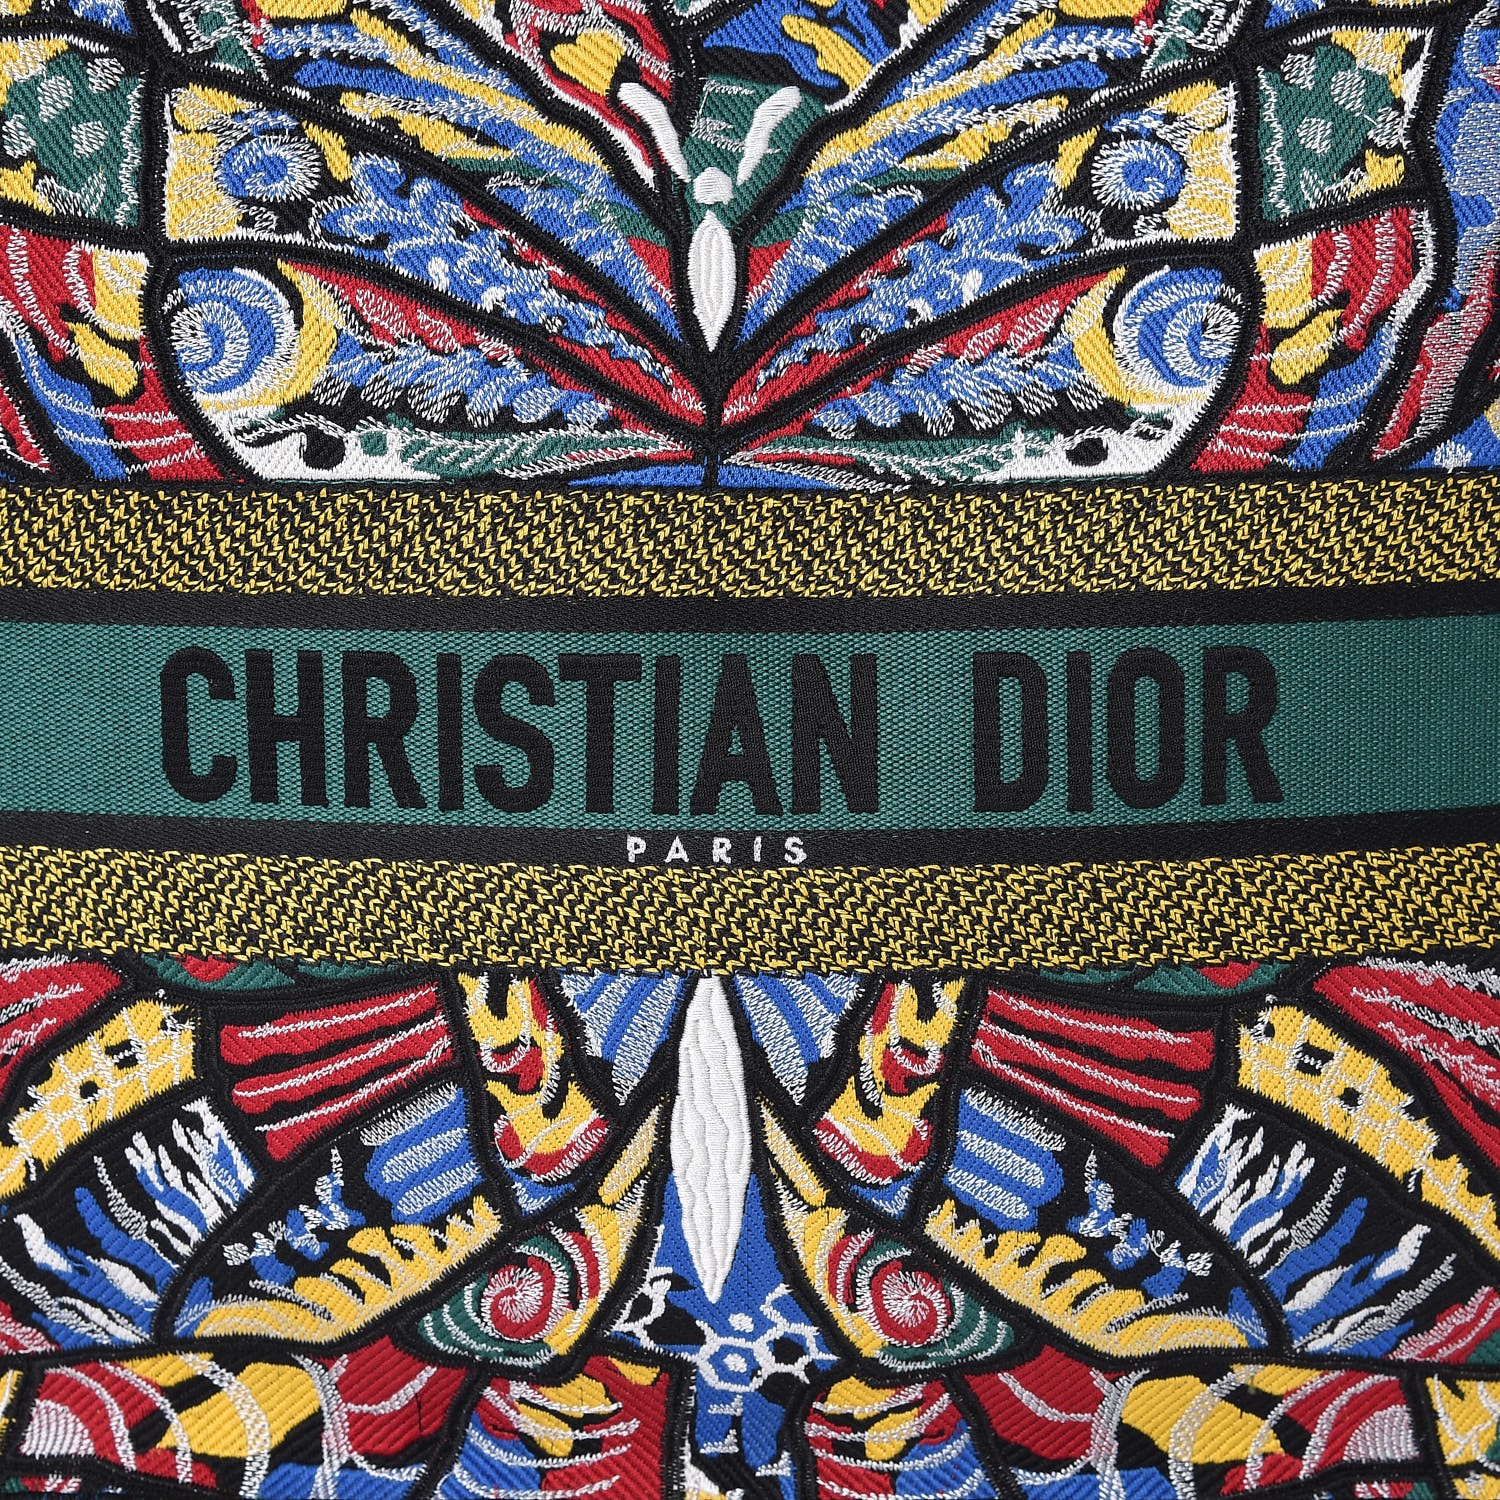 CHRISTIAN DIOR Canvas Embroidered Butterfly Book Tote Black Multicolor ...